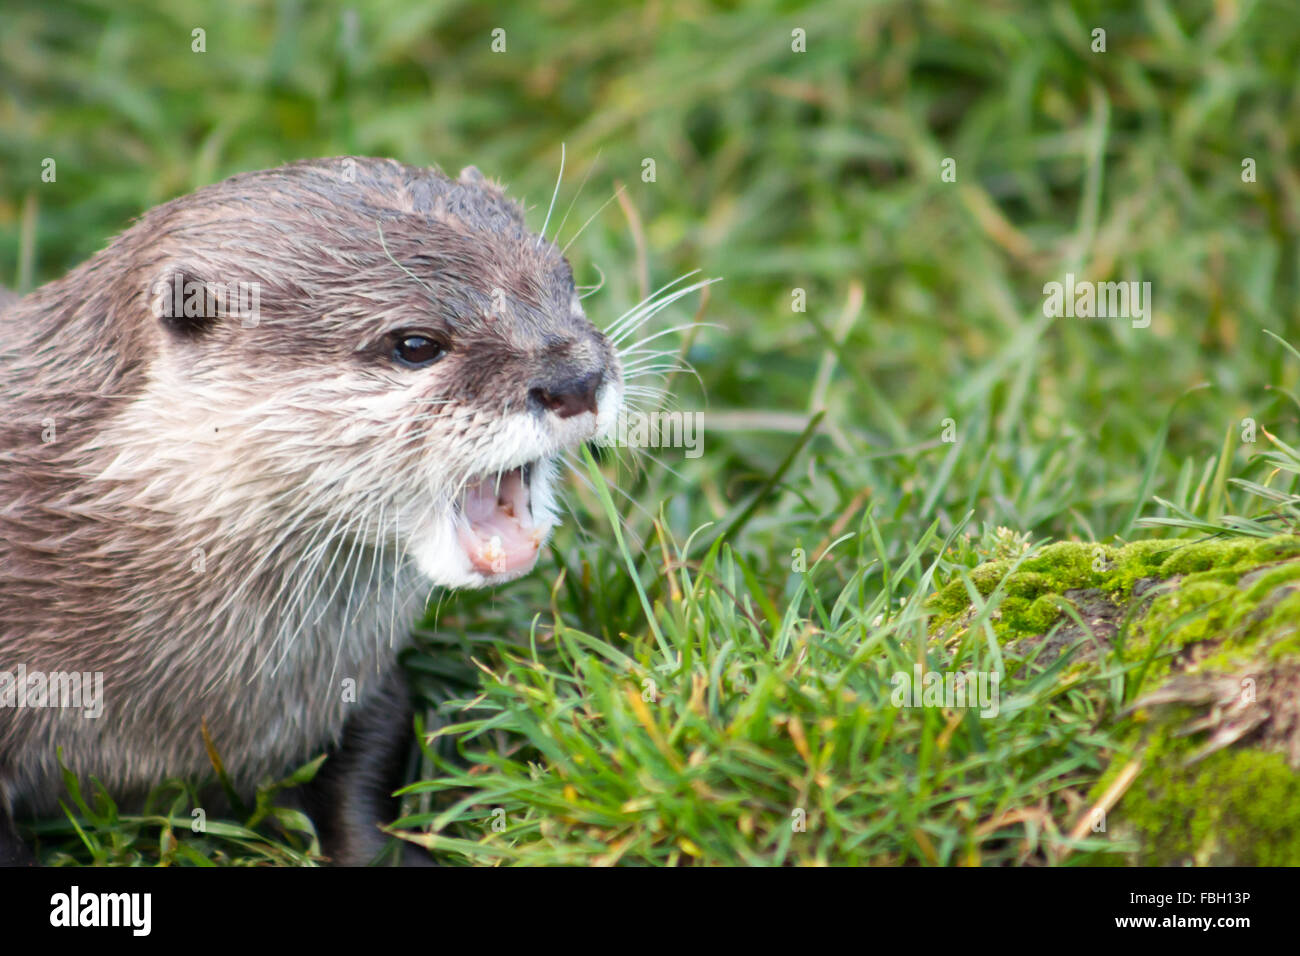 Asian Short Clawed Otter (Amblonyx cinerea), also known as Oriental Small-Clawed otter. Stock Photo